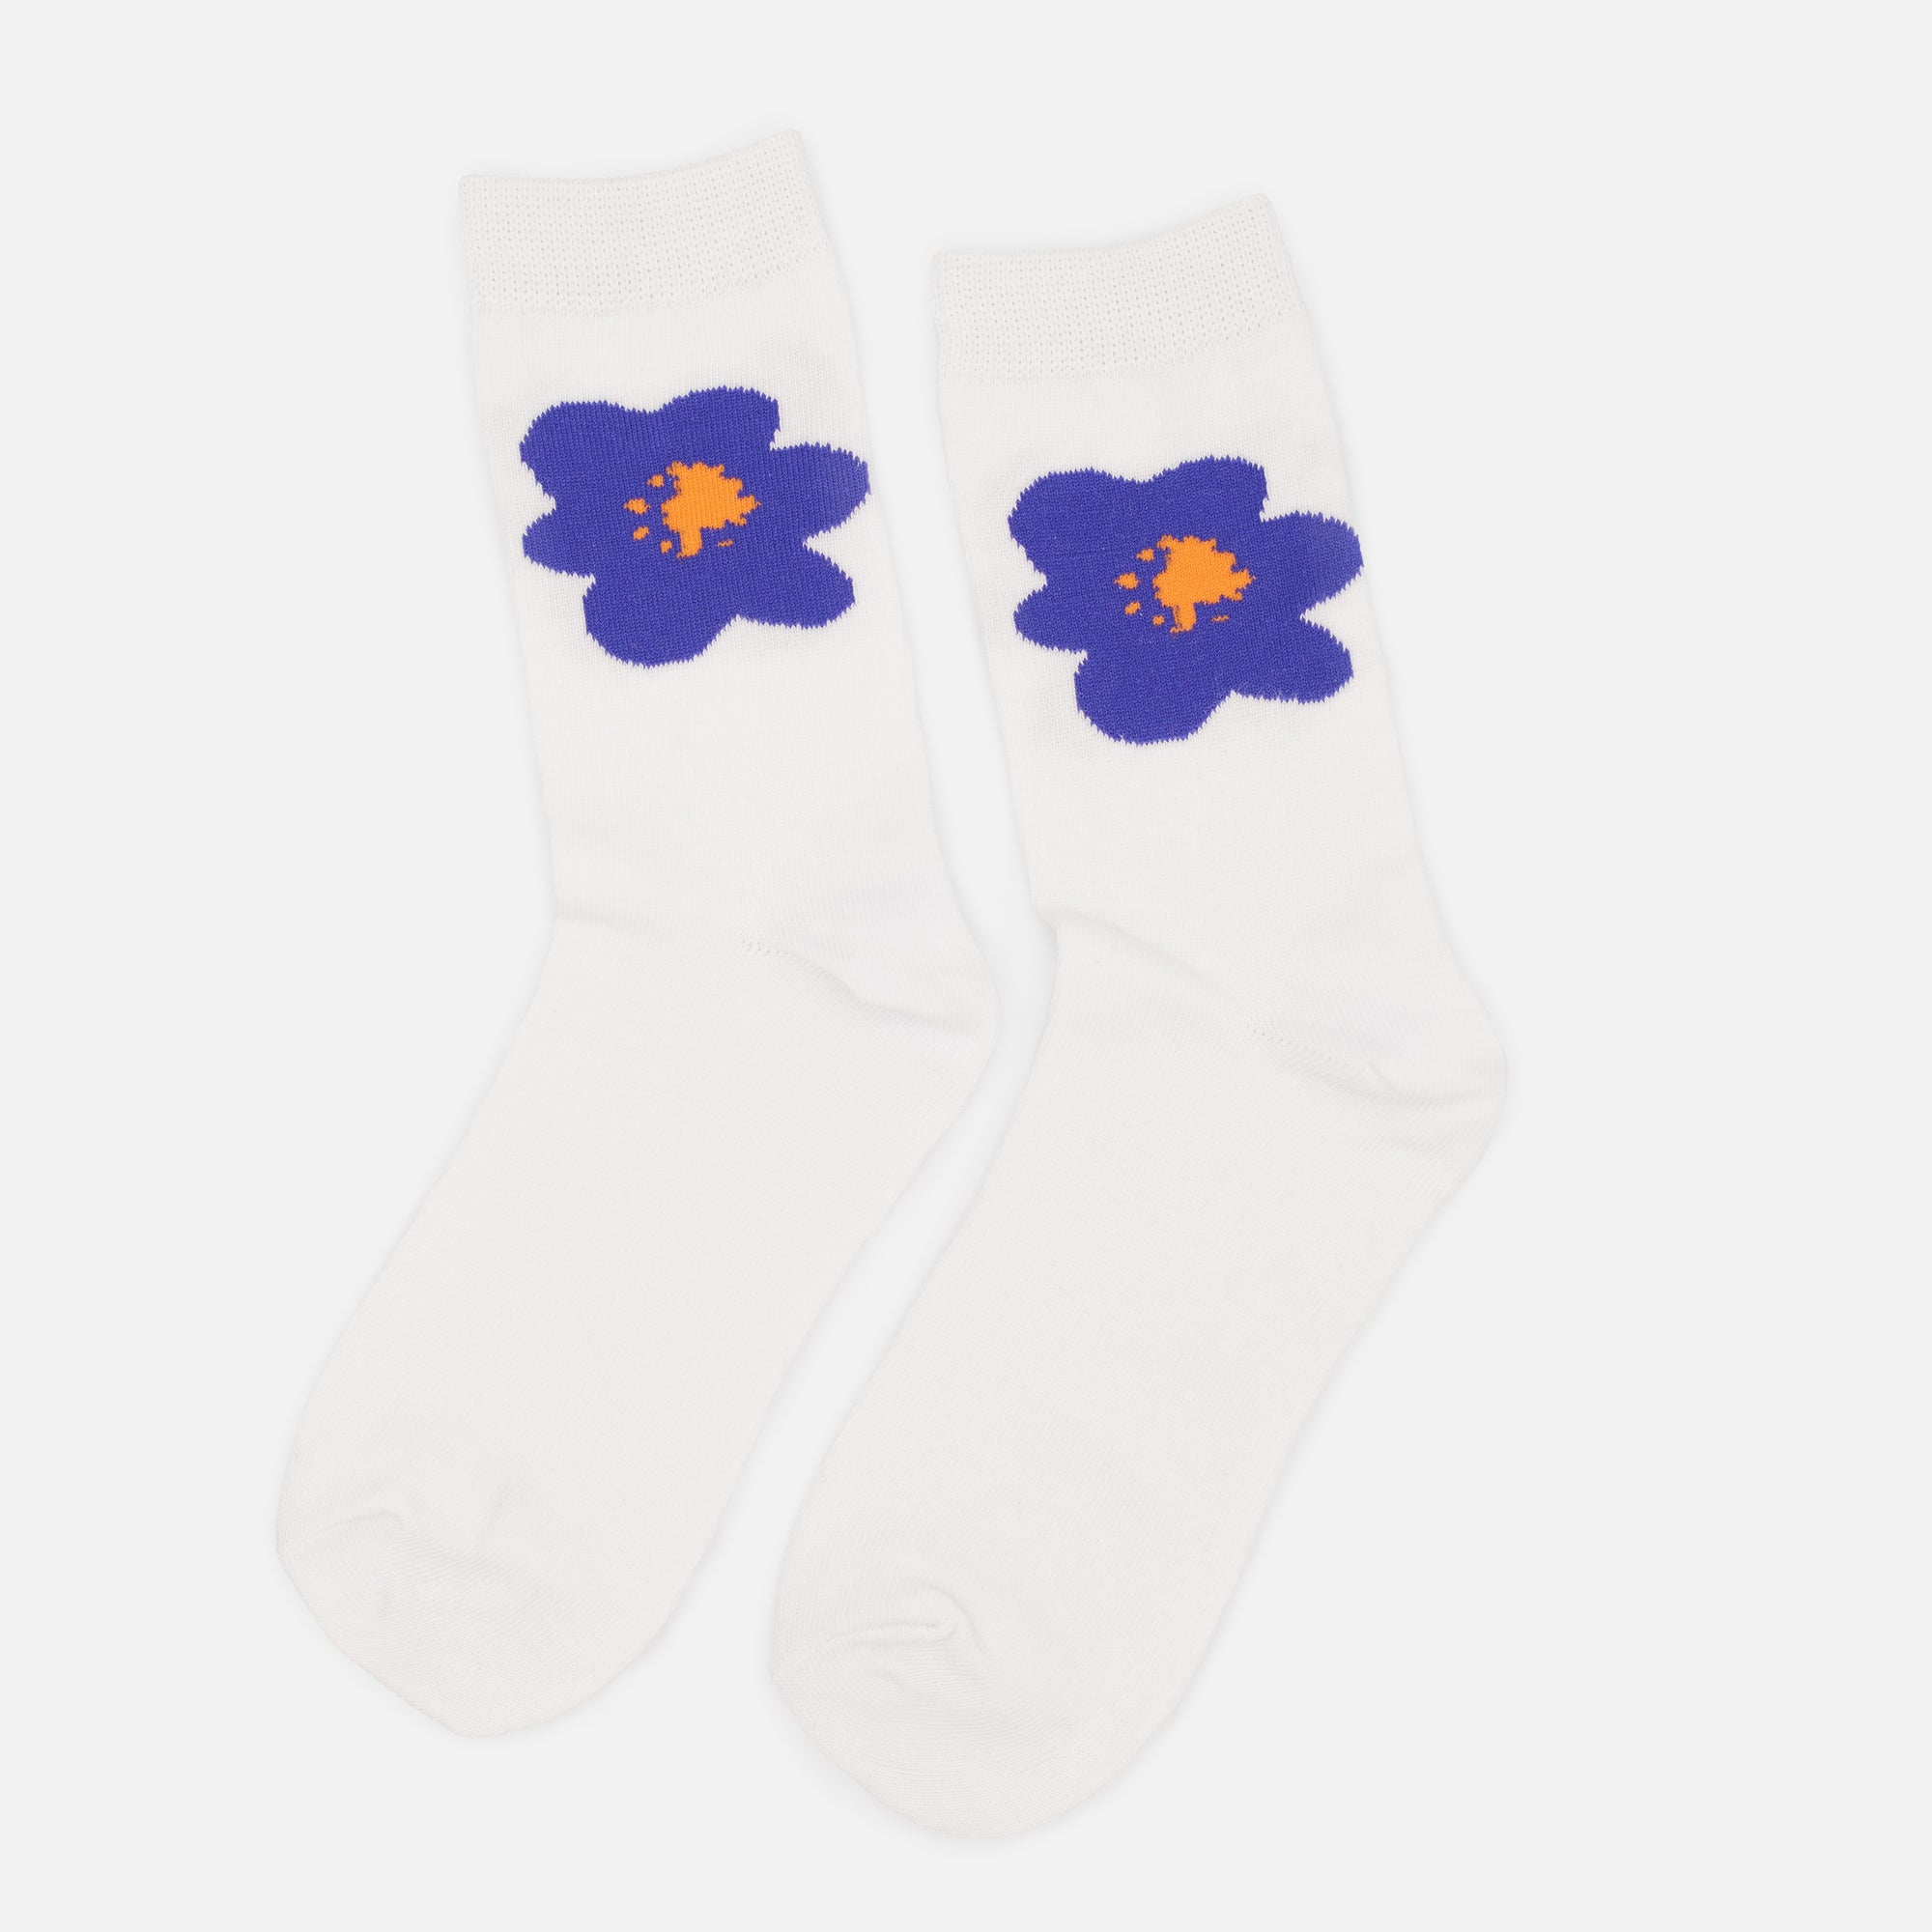 White stockings with blue and orange flowers